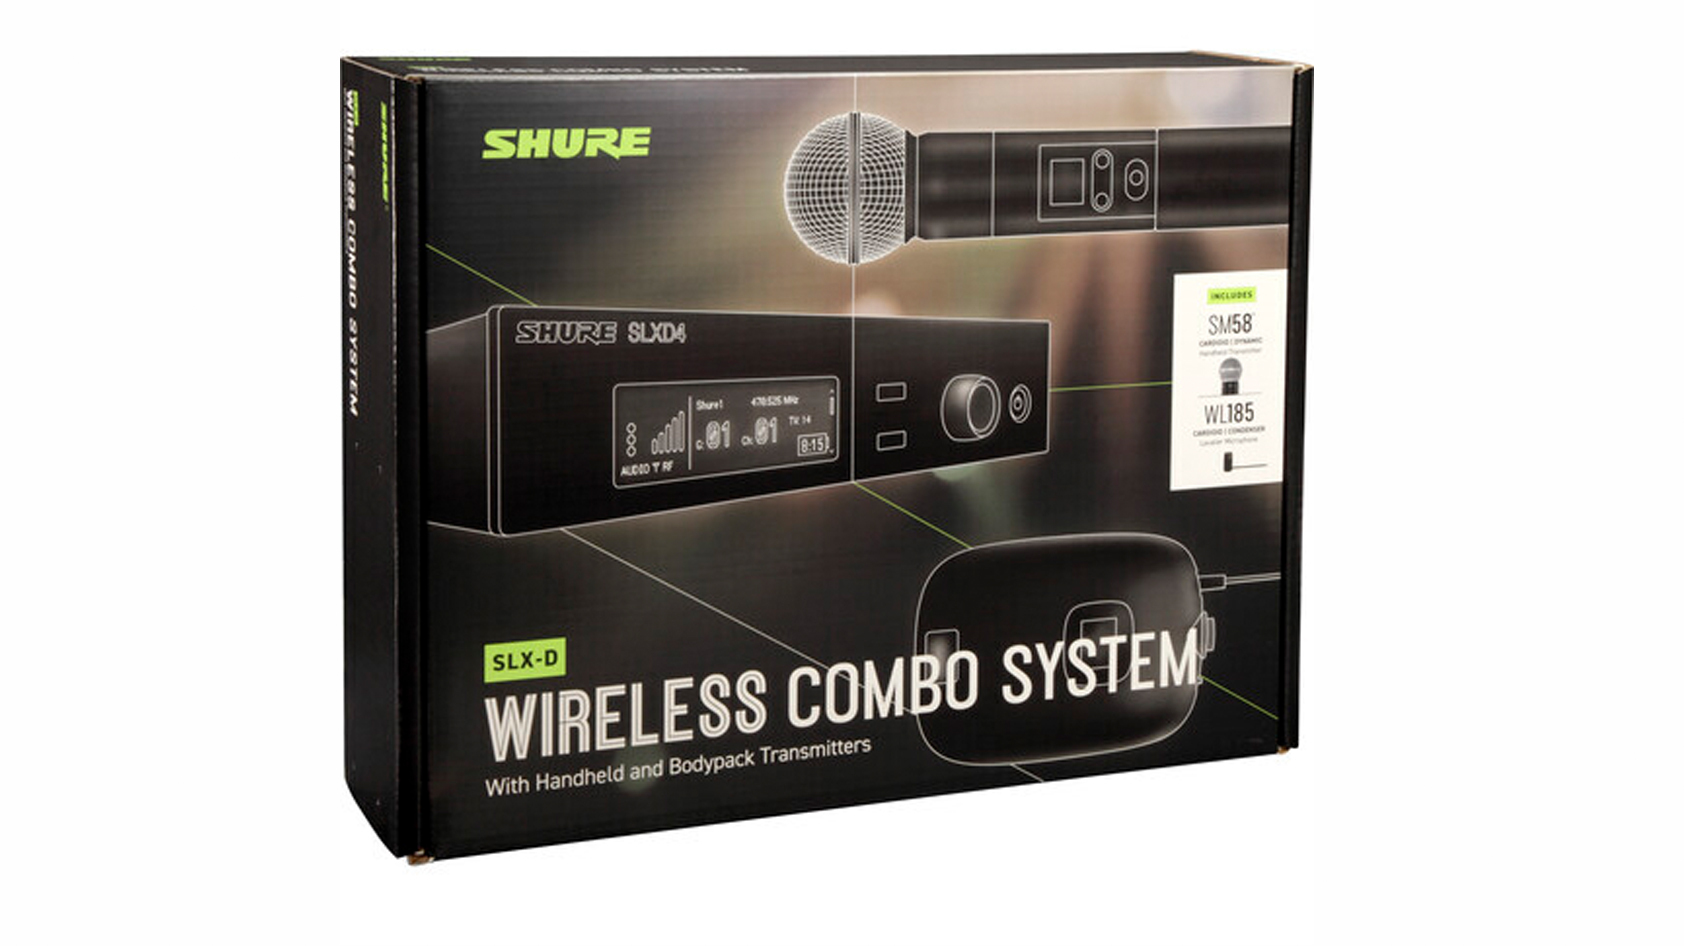 Shure SLXD124/85 wireless microphone system packaging against a white background.